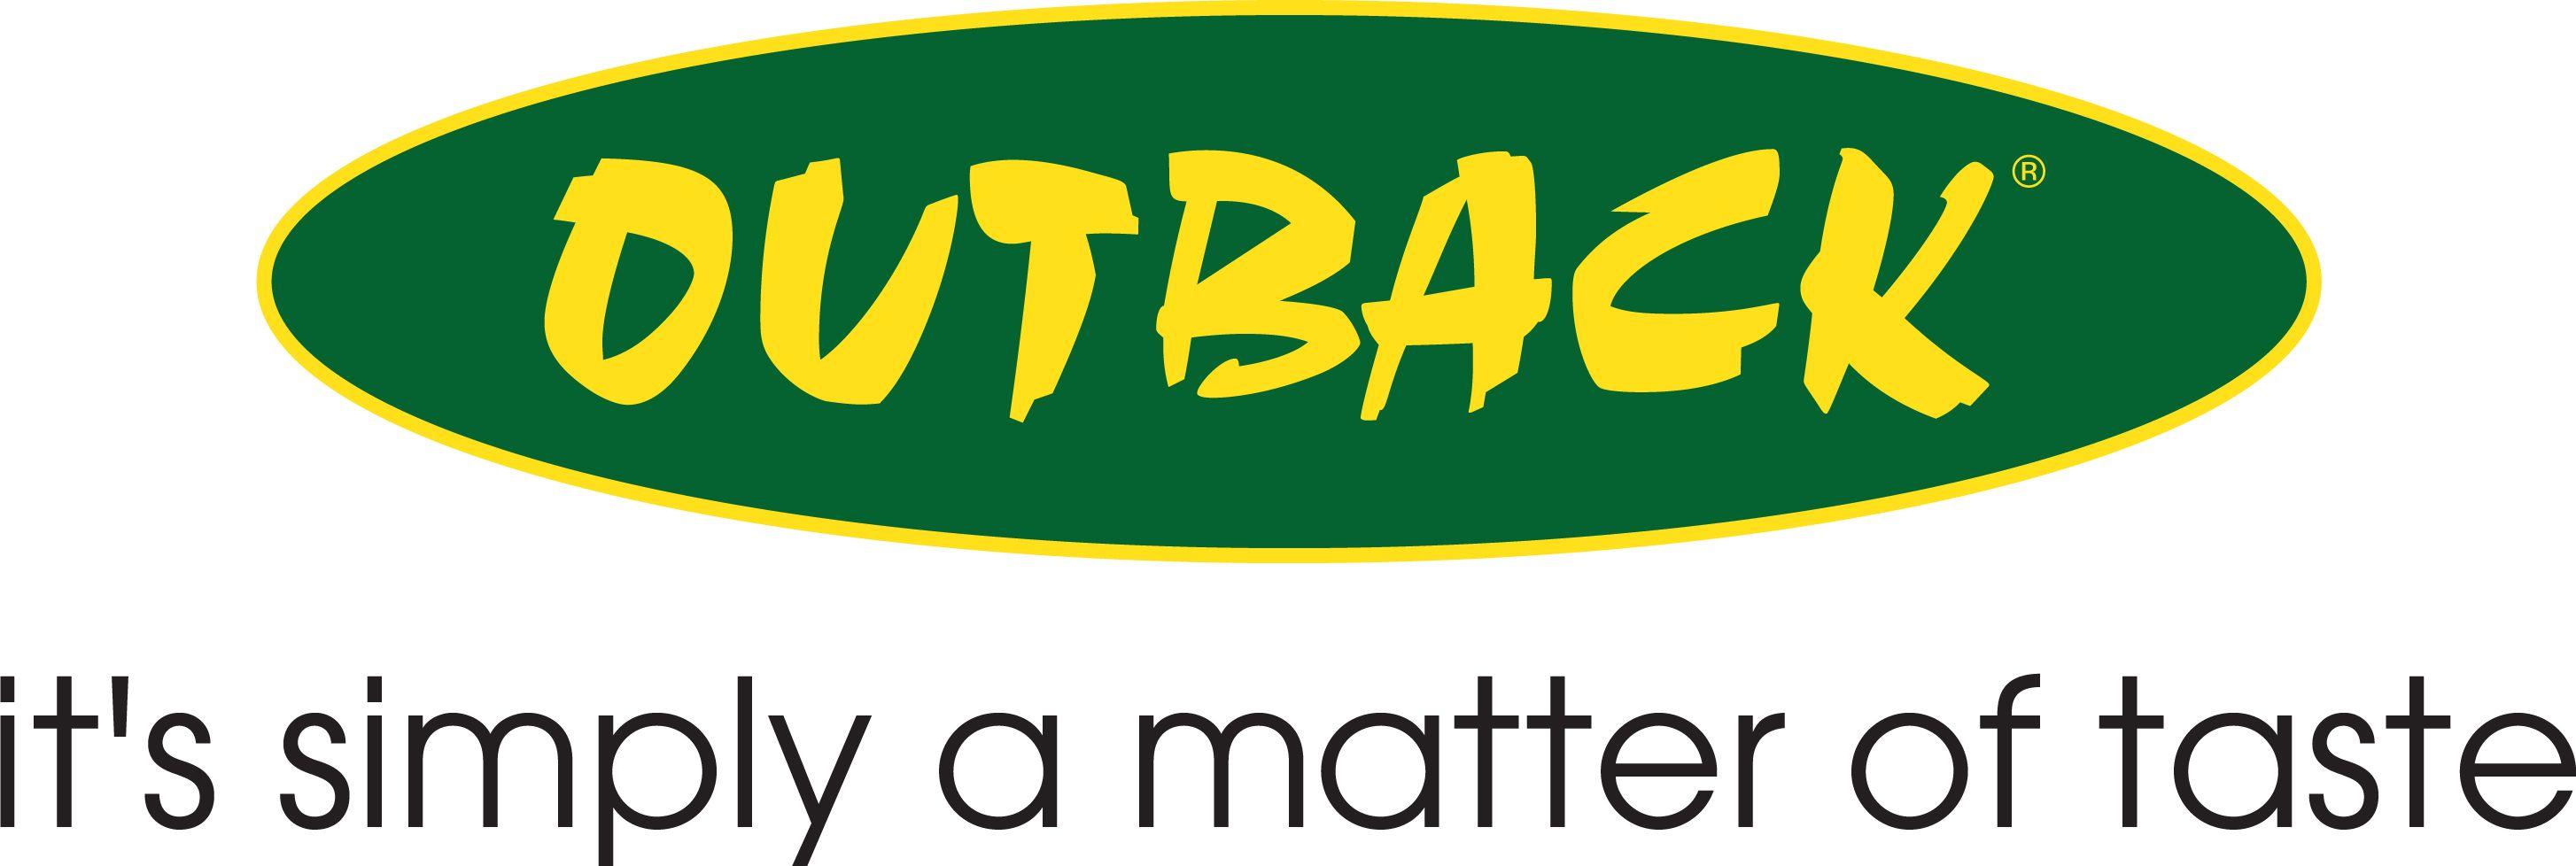 Outback Logo - Outback Predicts a Bright Future After TPA Takeover